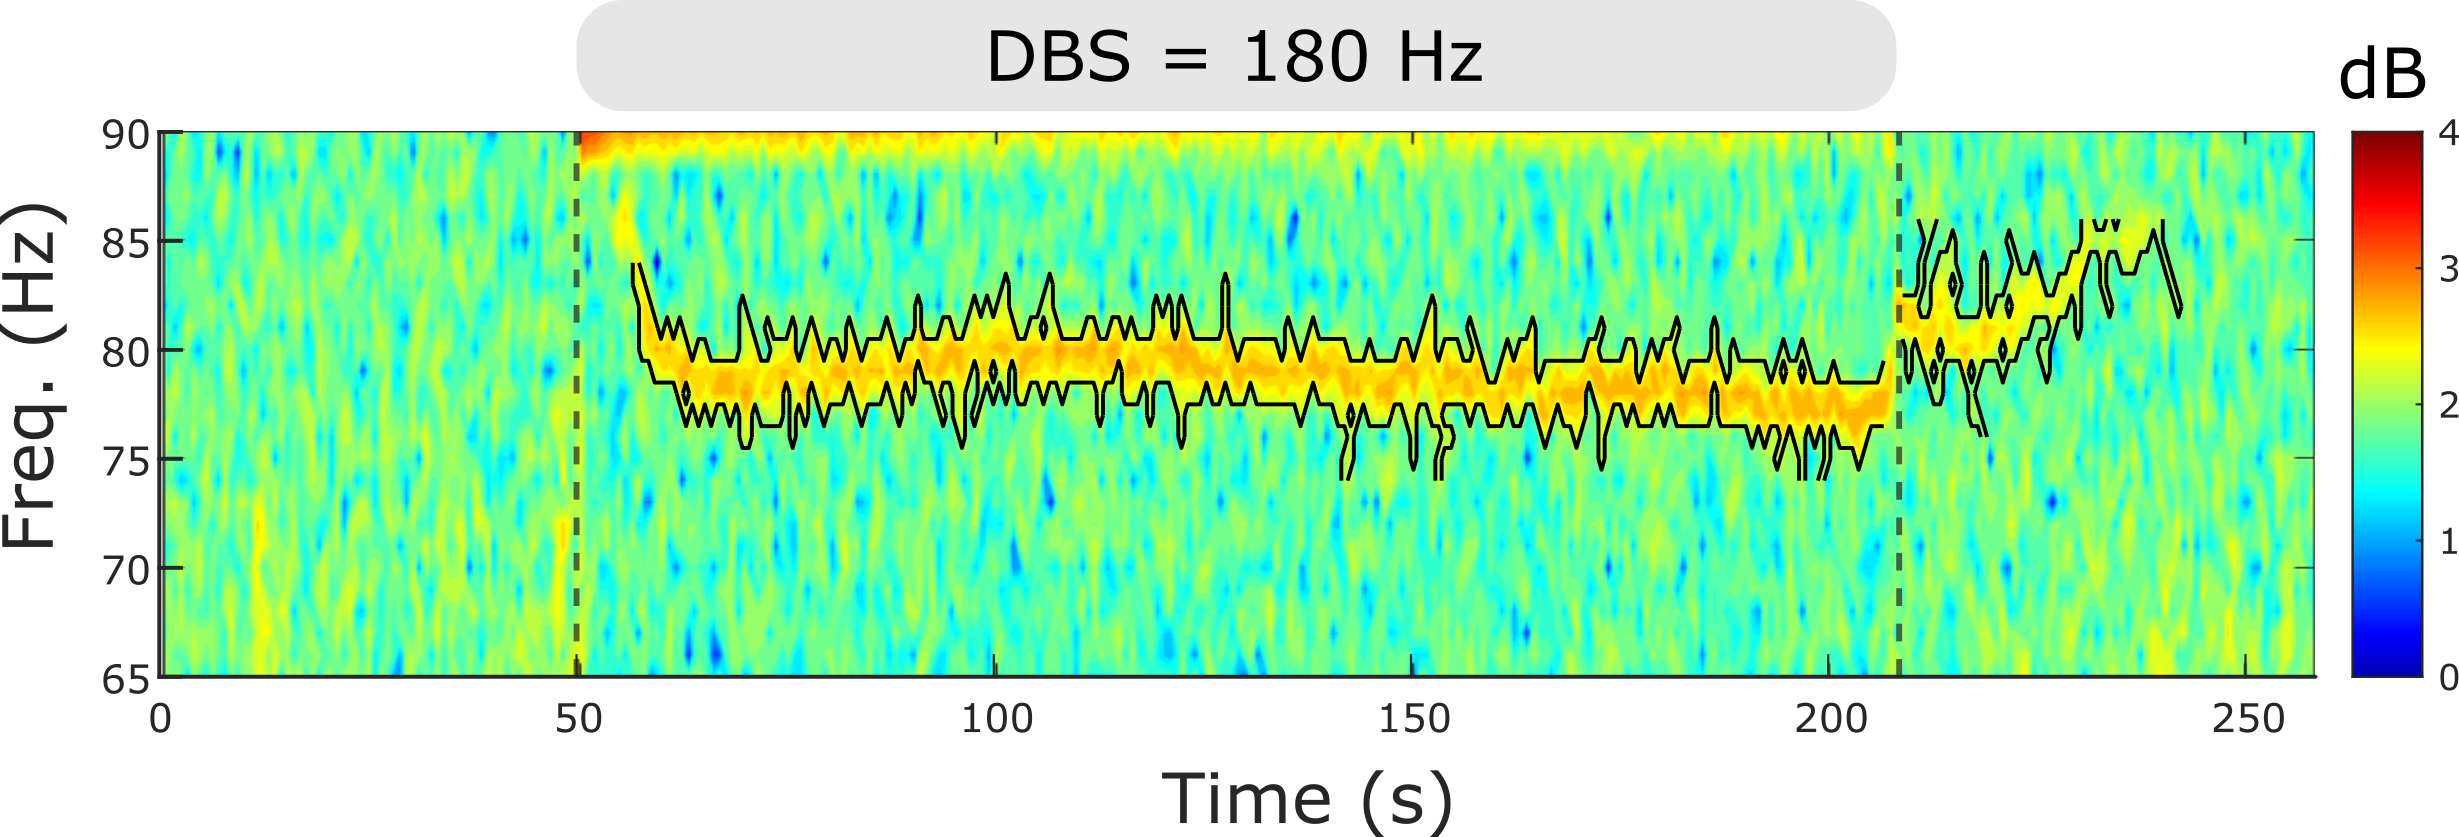 Spectrogram of nerve cell activity recorded in human brain.